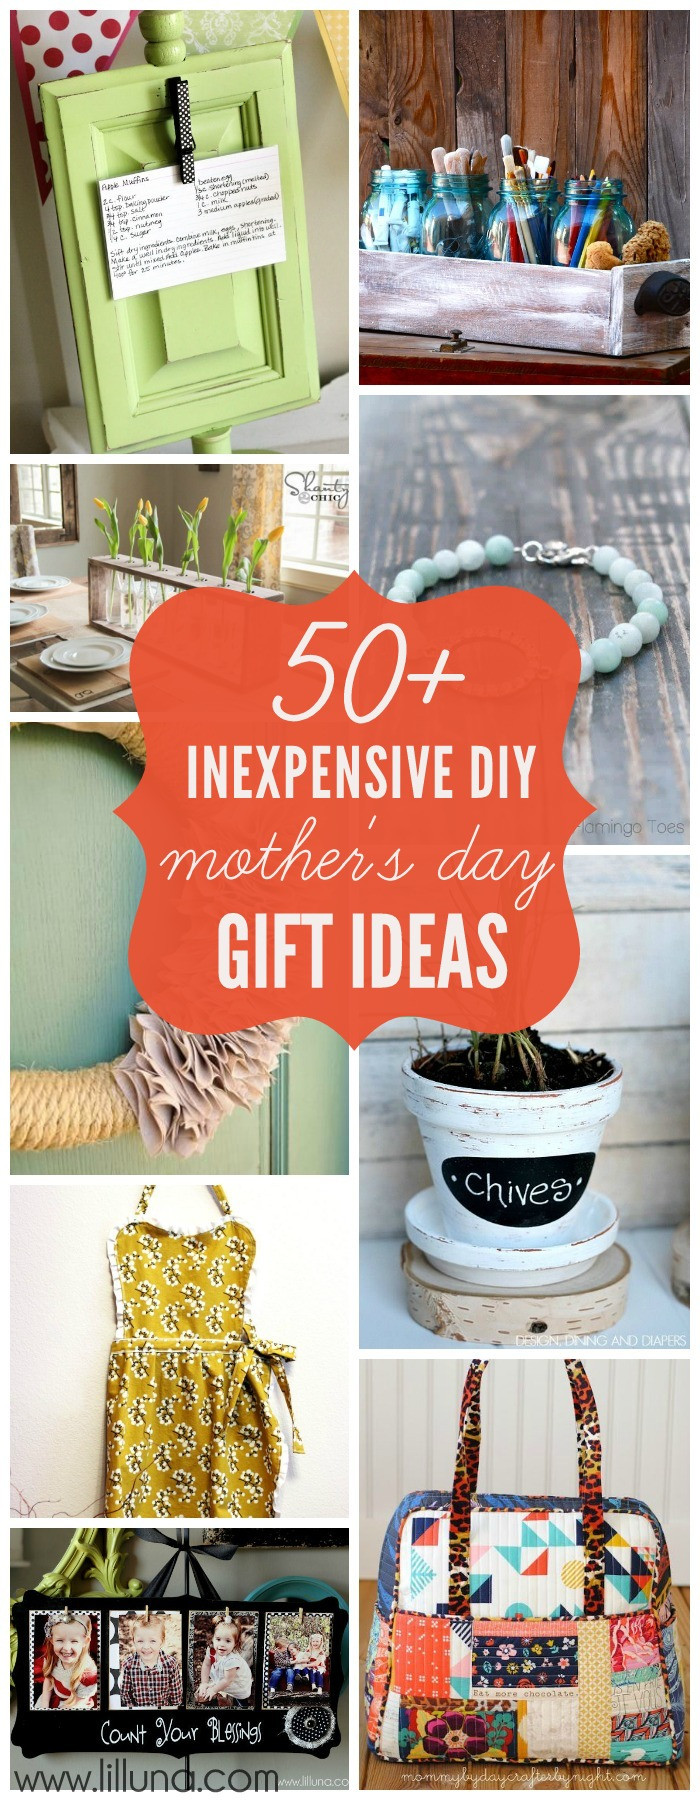 Diy Mother'S Day Gift Ideas
 Recipe for Love Prints